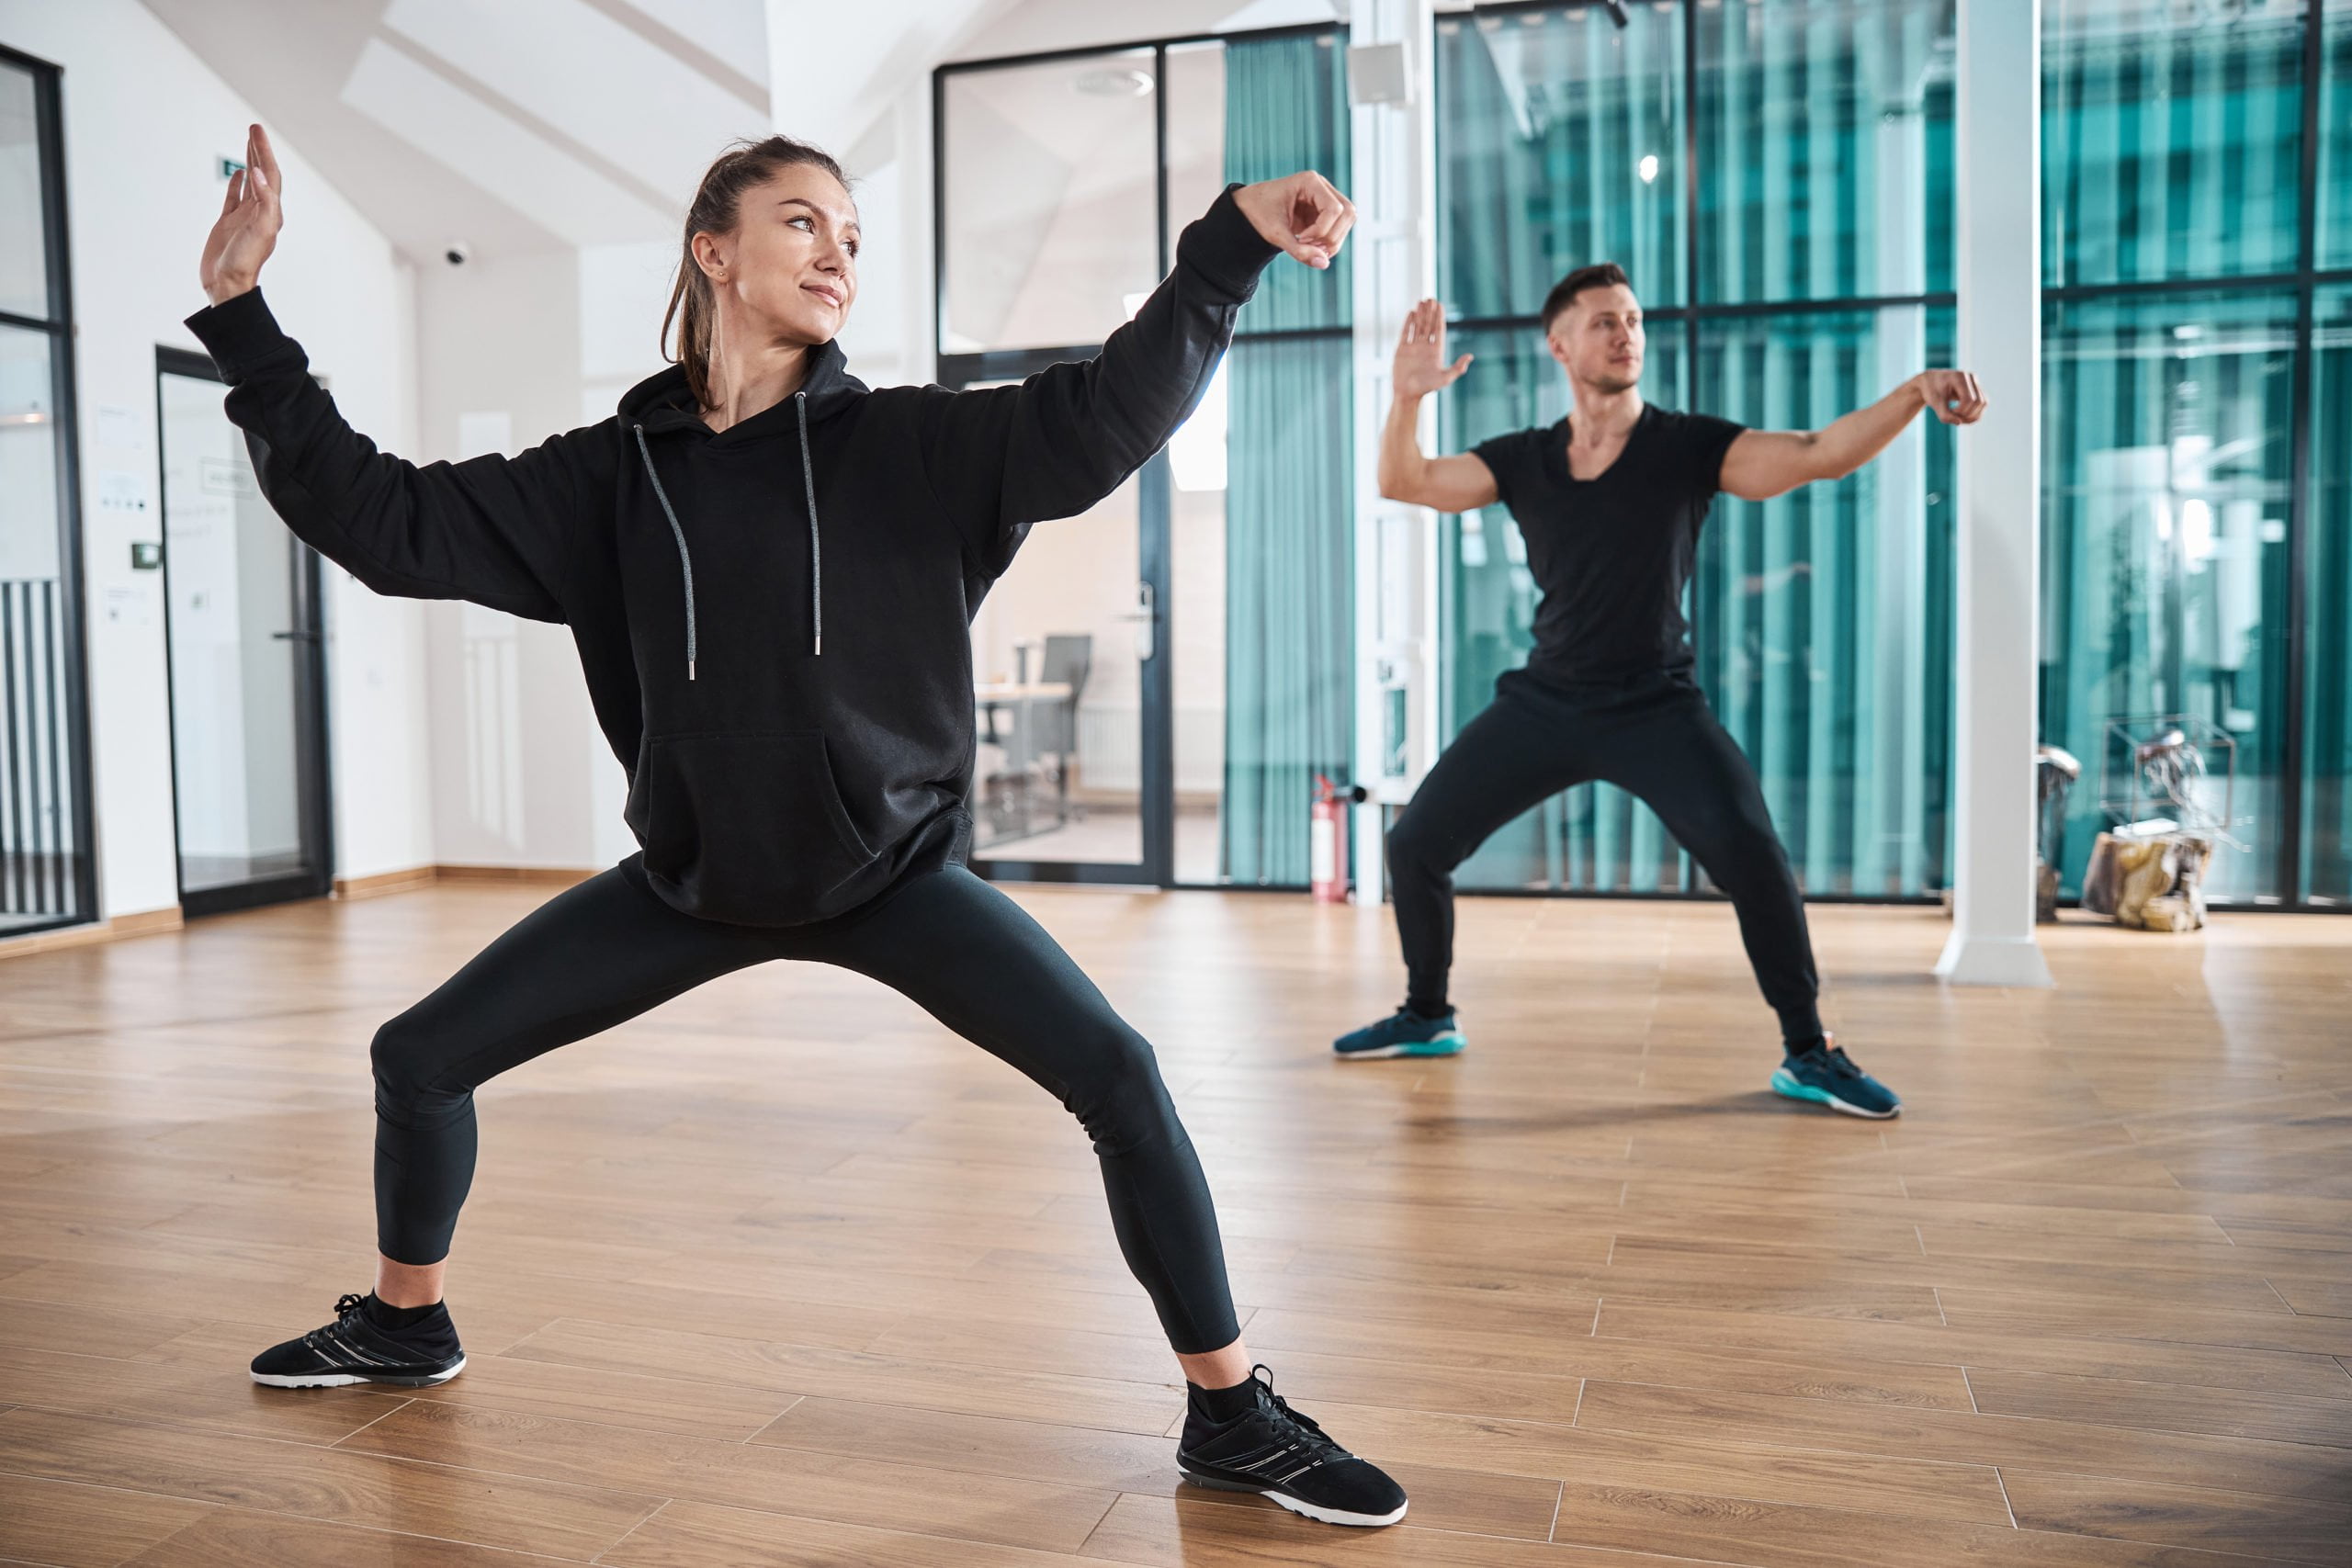 Pair of athletes training a single whip pose